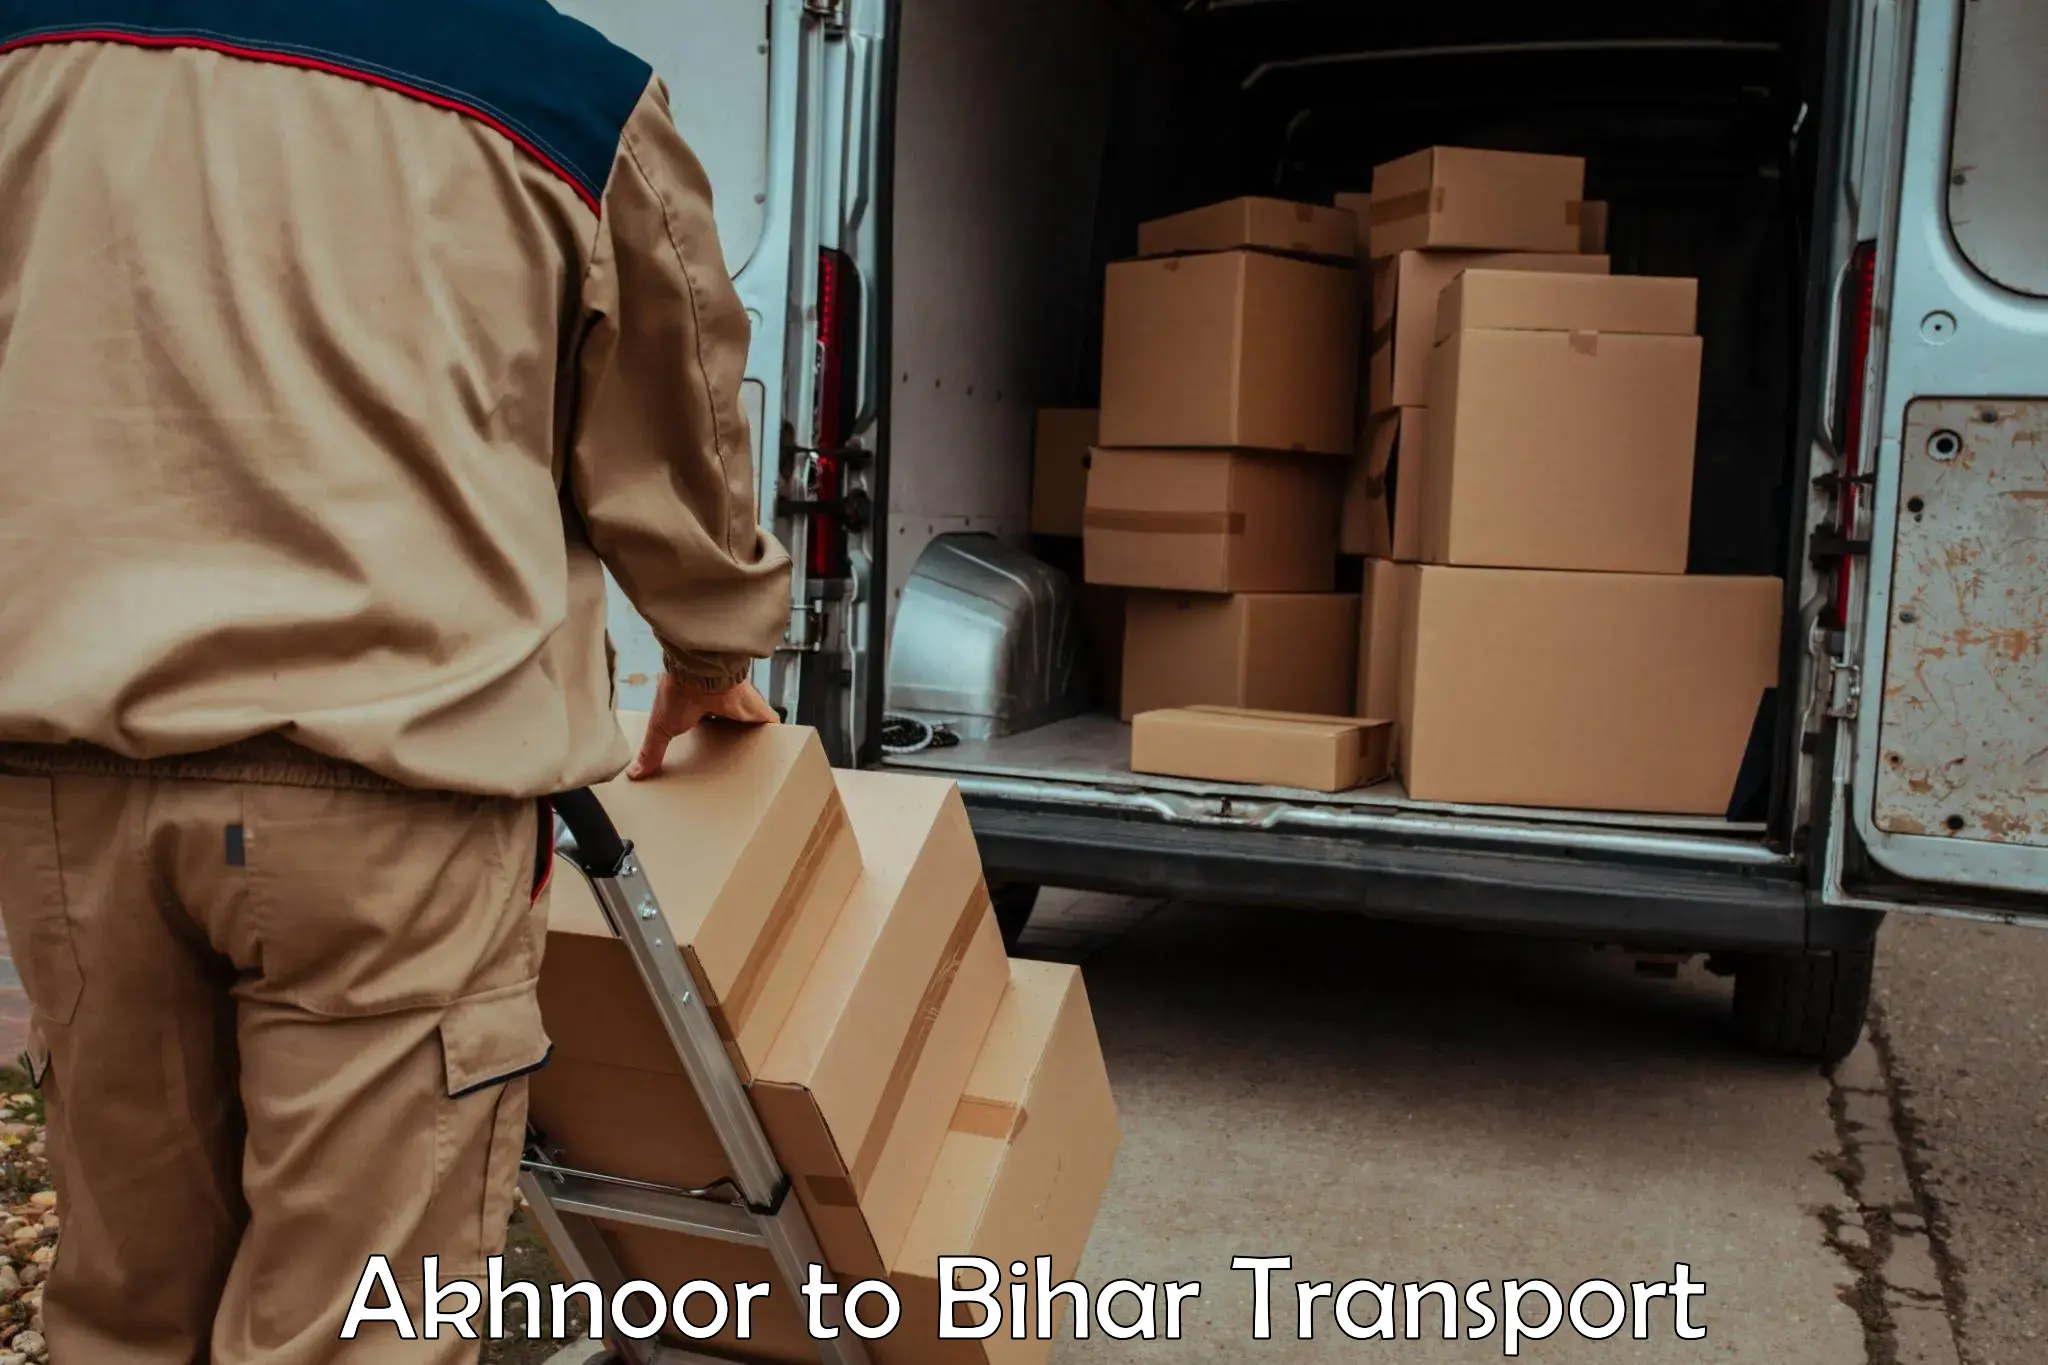 Part load transport service in India Akhnoor to Piro